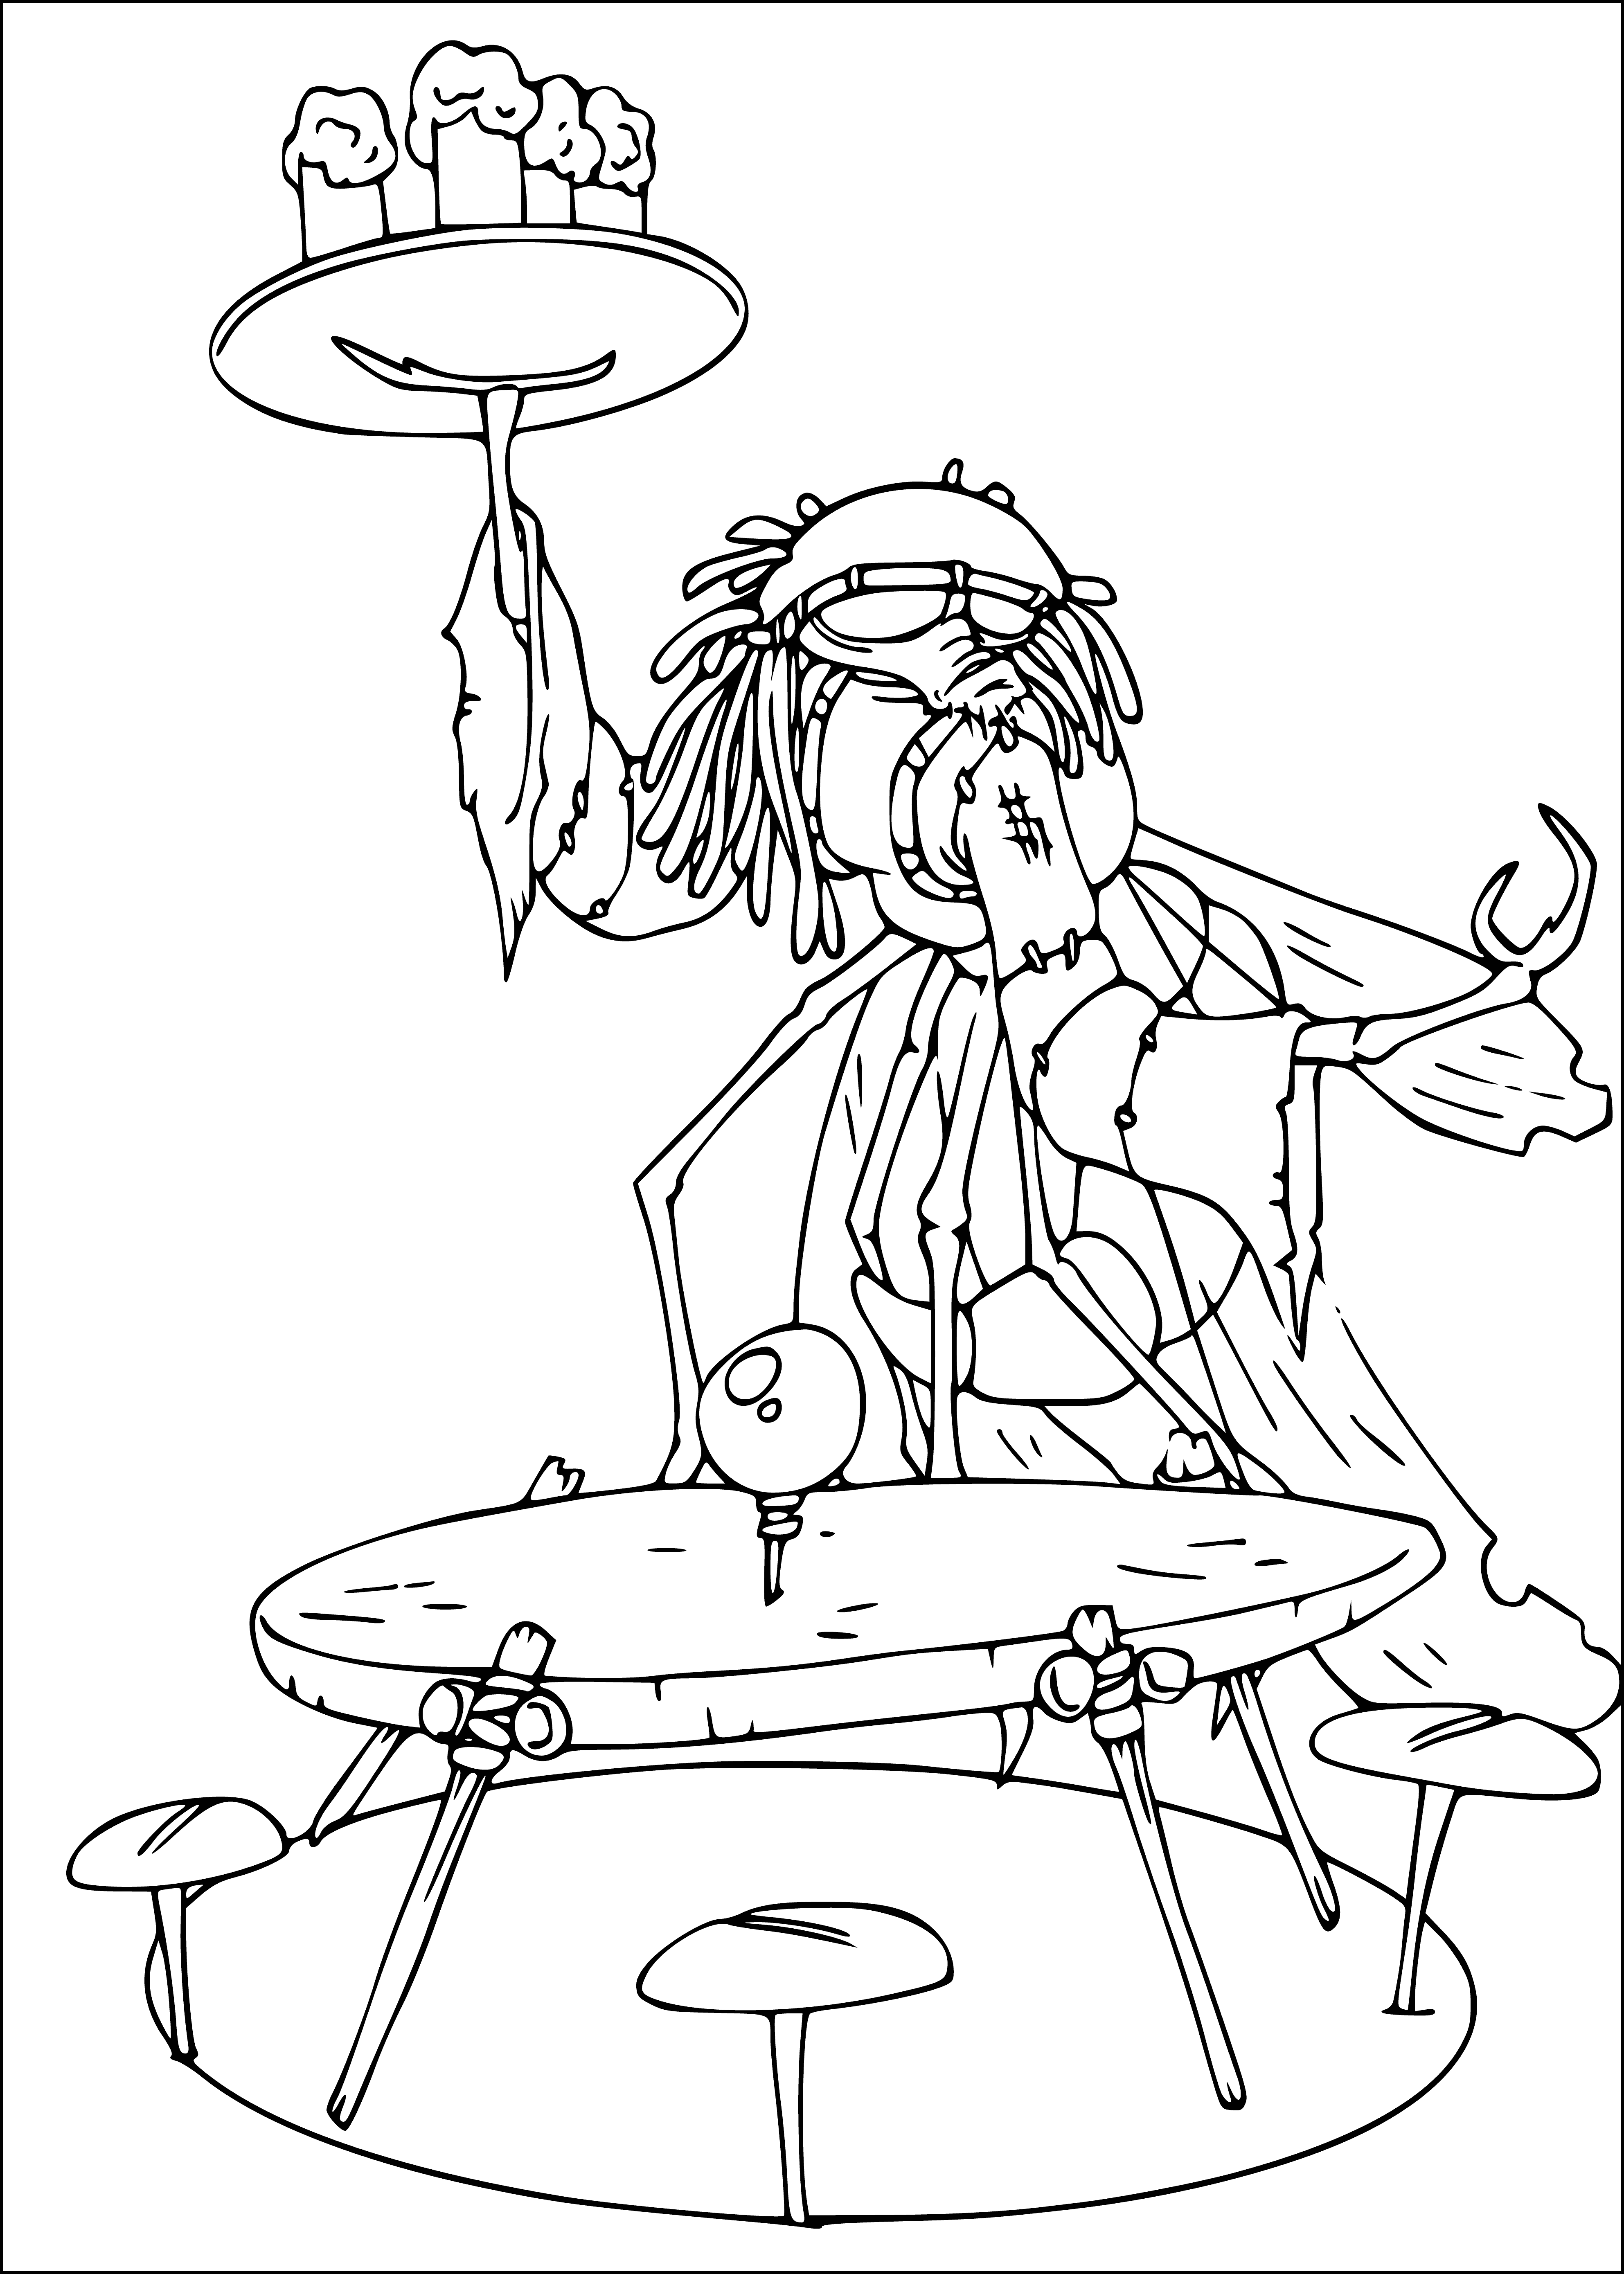 Here is such a waiter coloring page